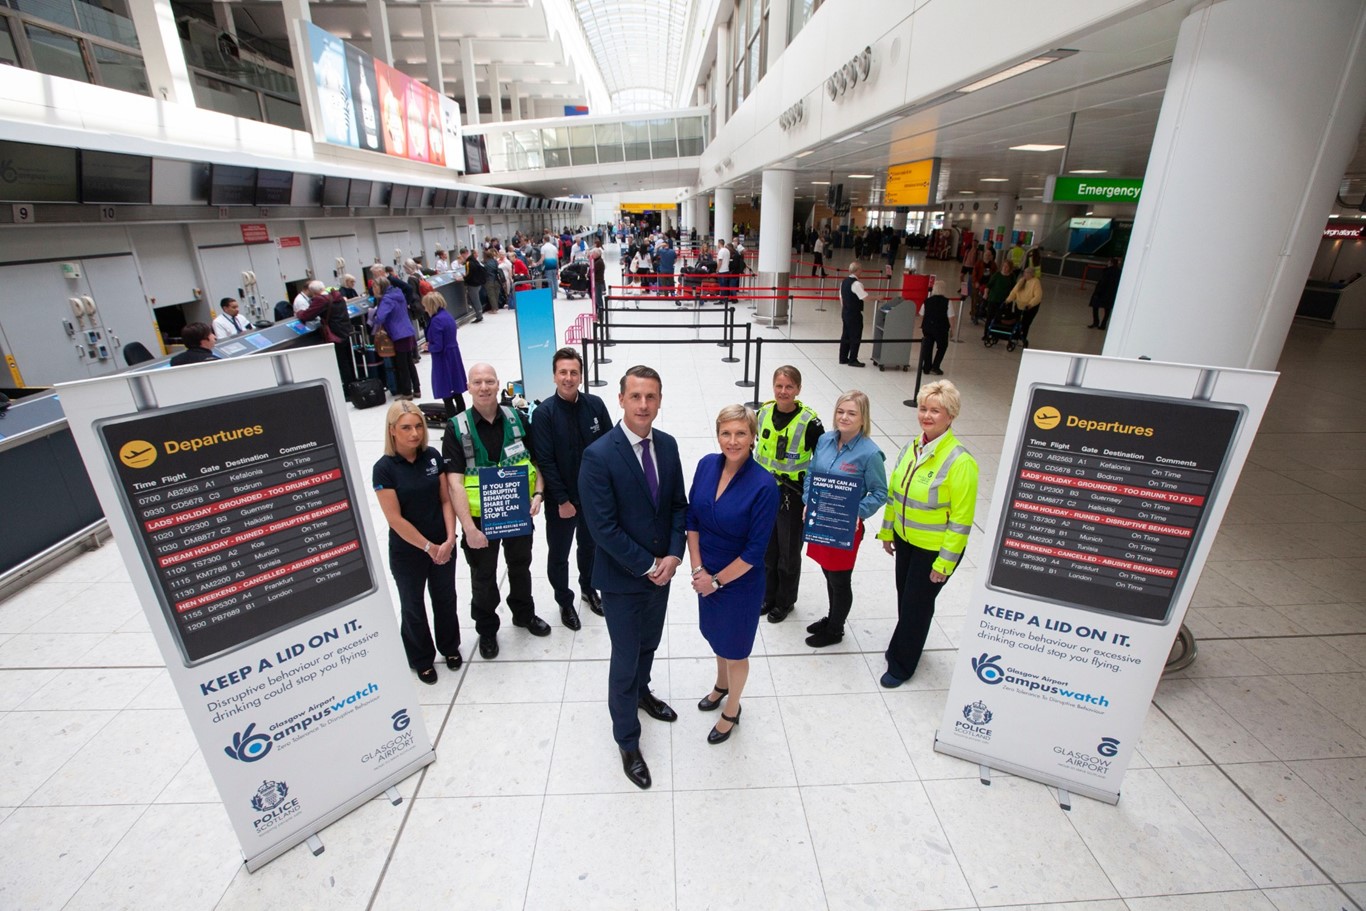 UK Aviation Minister visits Glasgow Airport to launch this year's Campus Watch campaign